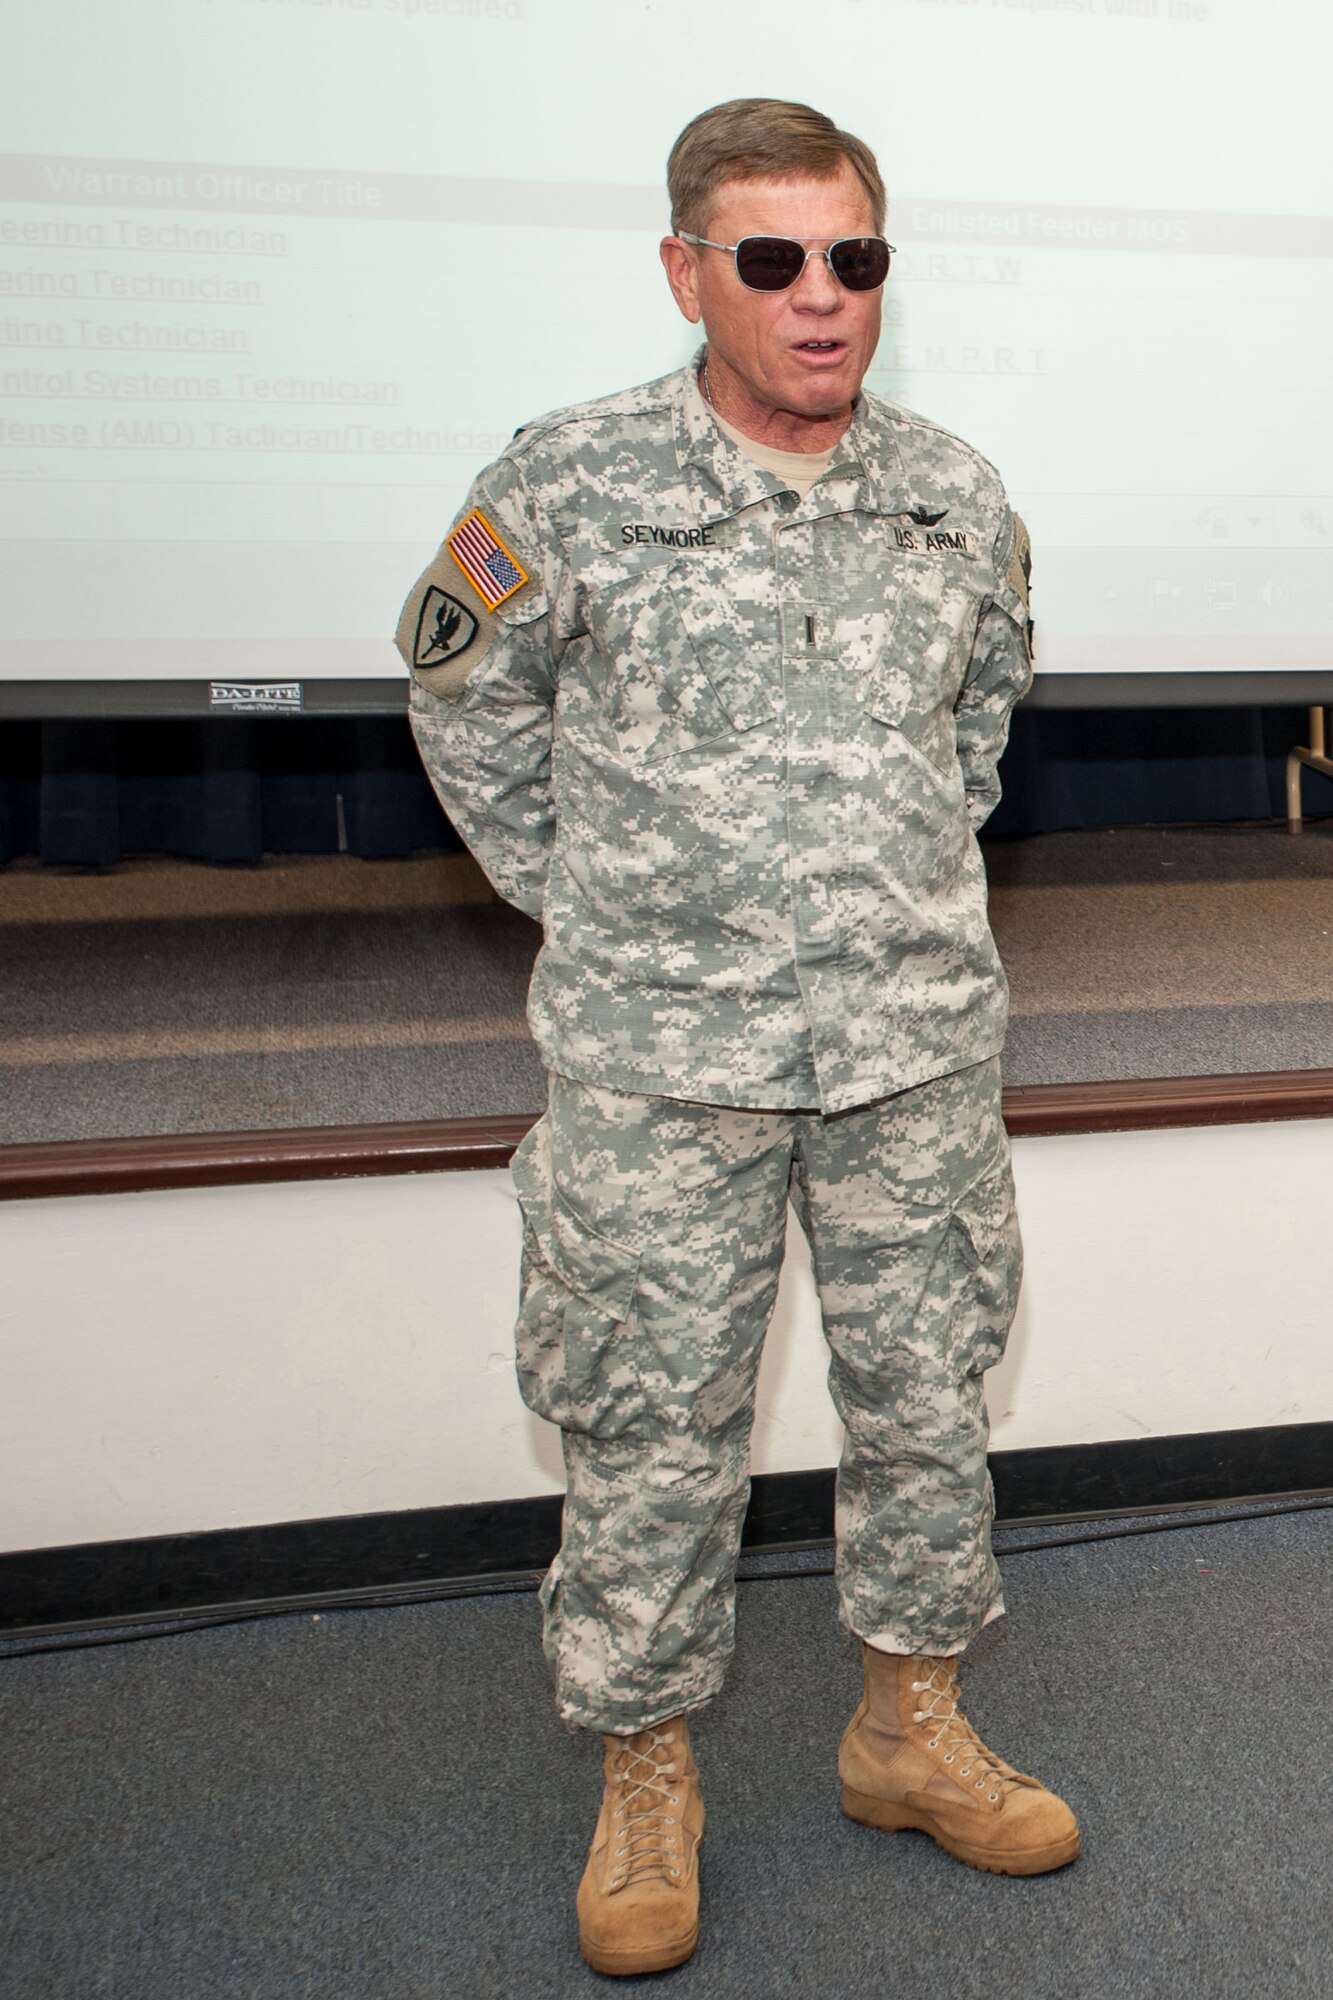 U.S. Army Command Chief Warrant Officer 5 Eric Seymore, South Carolina Army National Guard, spoke to the 169th Student Flight during a visit to McEntire Joint National Guard Base, S.C., Nov. 2, 2013. Seymore is the last serving Vietnam War veteran in the S.C. National Guard. He spoke about his experience in the Army as an aviator, compared similarities to the Air Force and Army and gave advice on how to succeed in future endeavors as Airmen.  (U.S. Air National Guard photo by Staff Sgt. Jorge Intriago/Released)